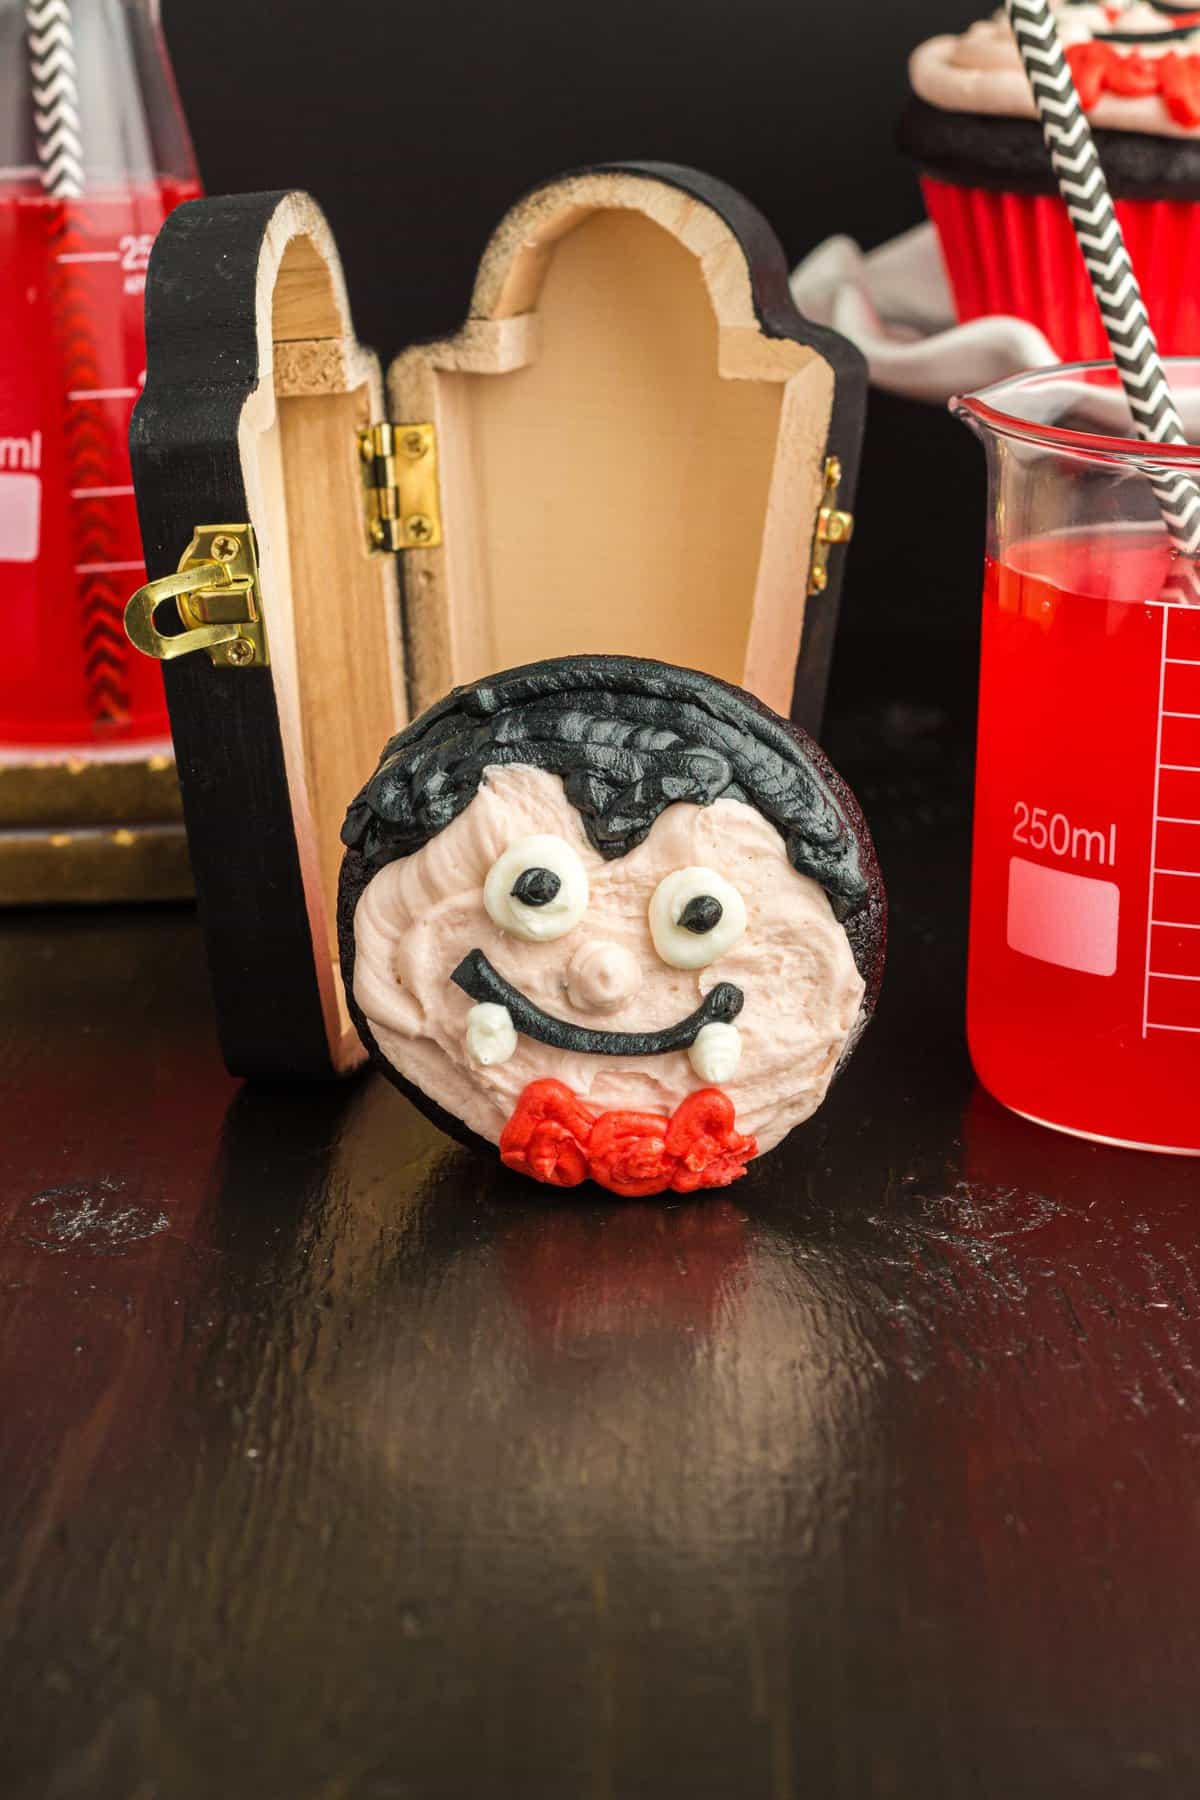 Vampire cupcake laying on its side to show the full vampire face. Wood coffin and red drink in the background.